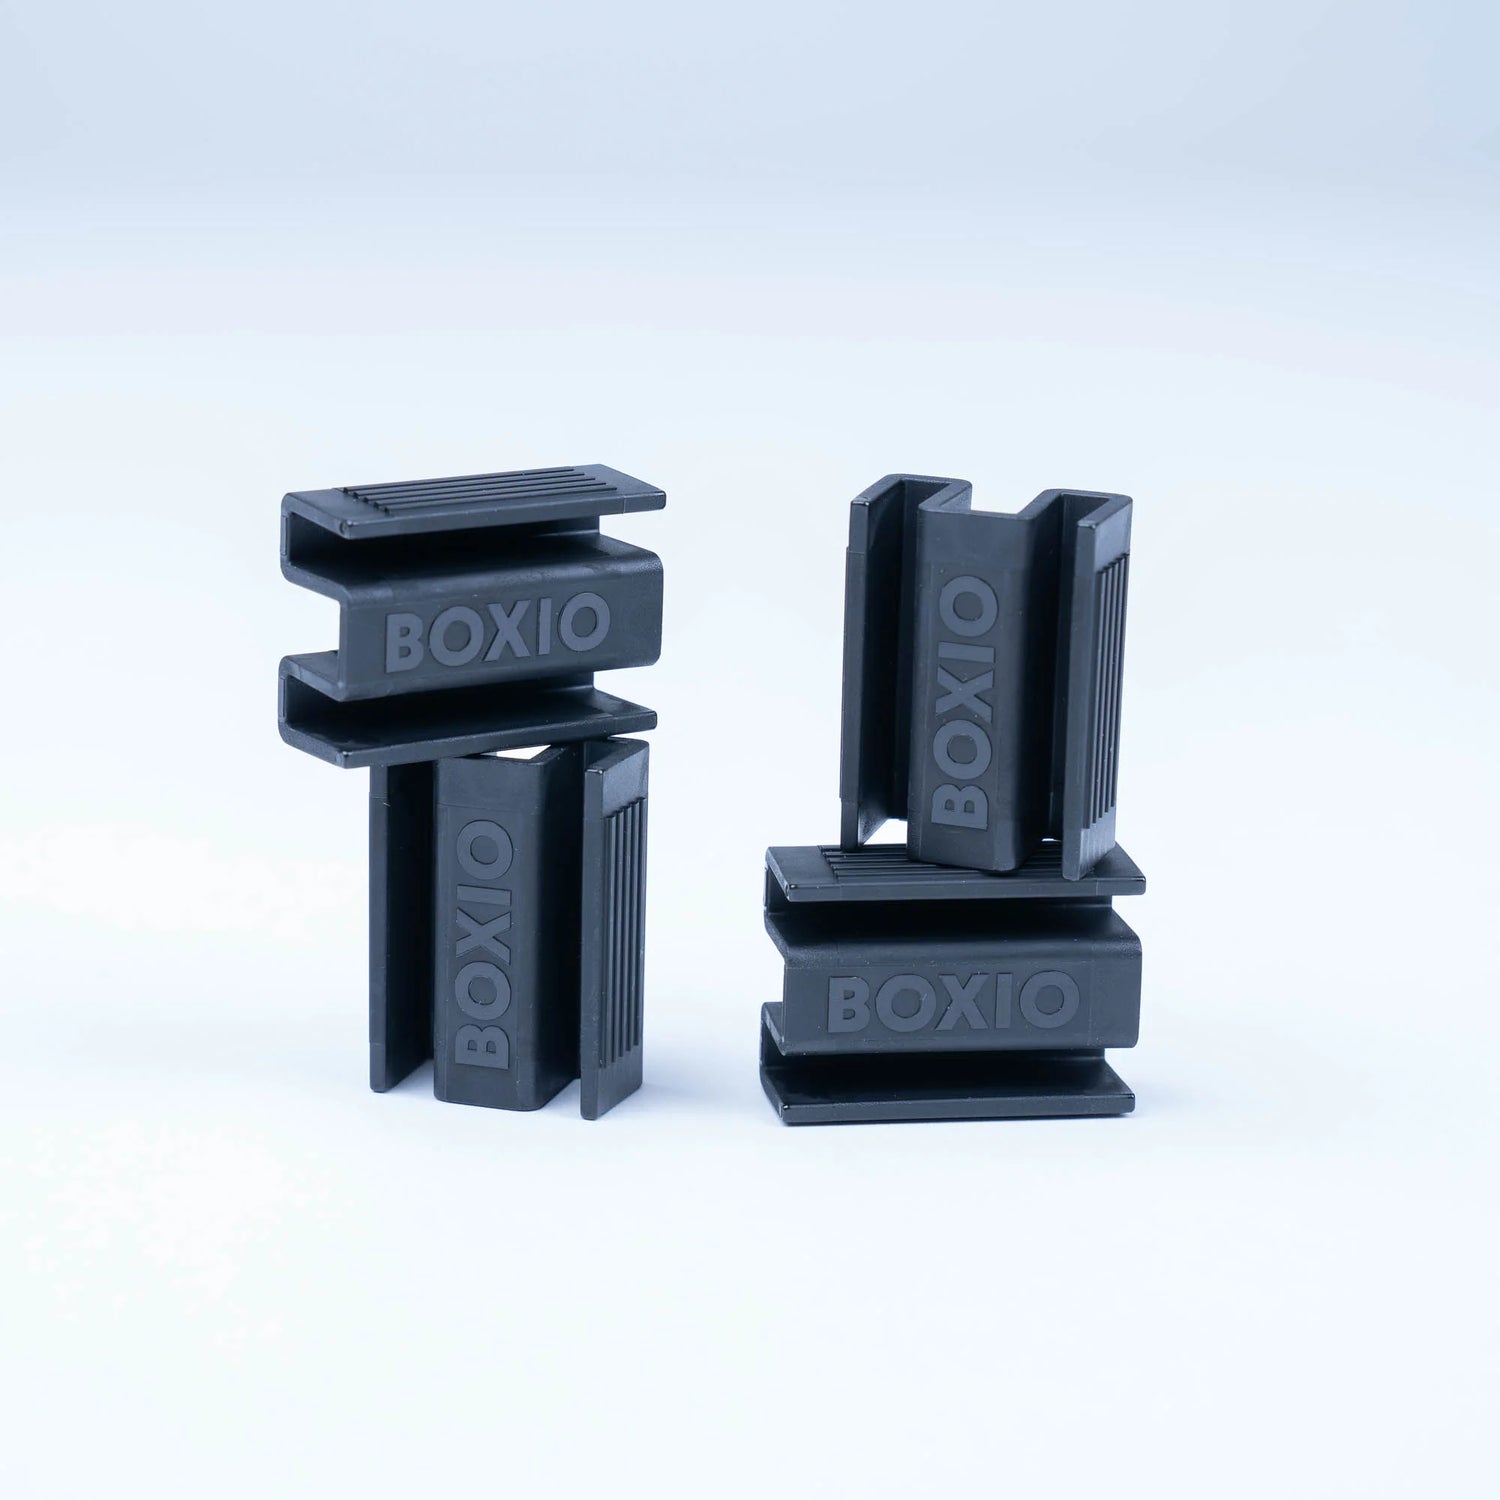 BOXIO SecureStack CLIPS - The ultimate stacking aid for your Boxio